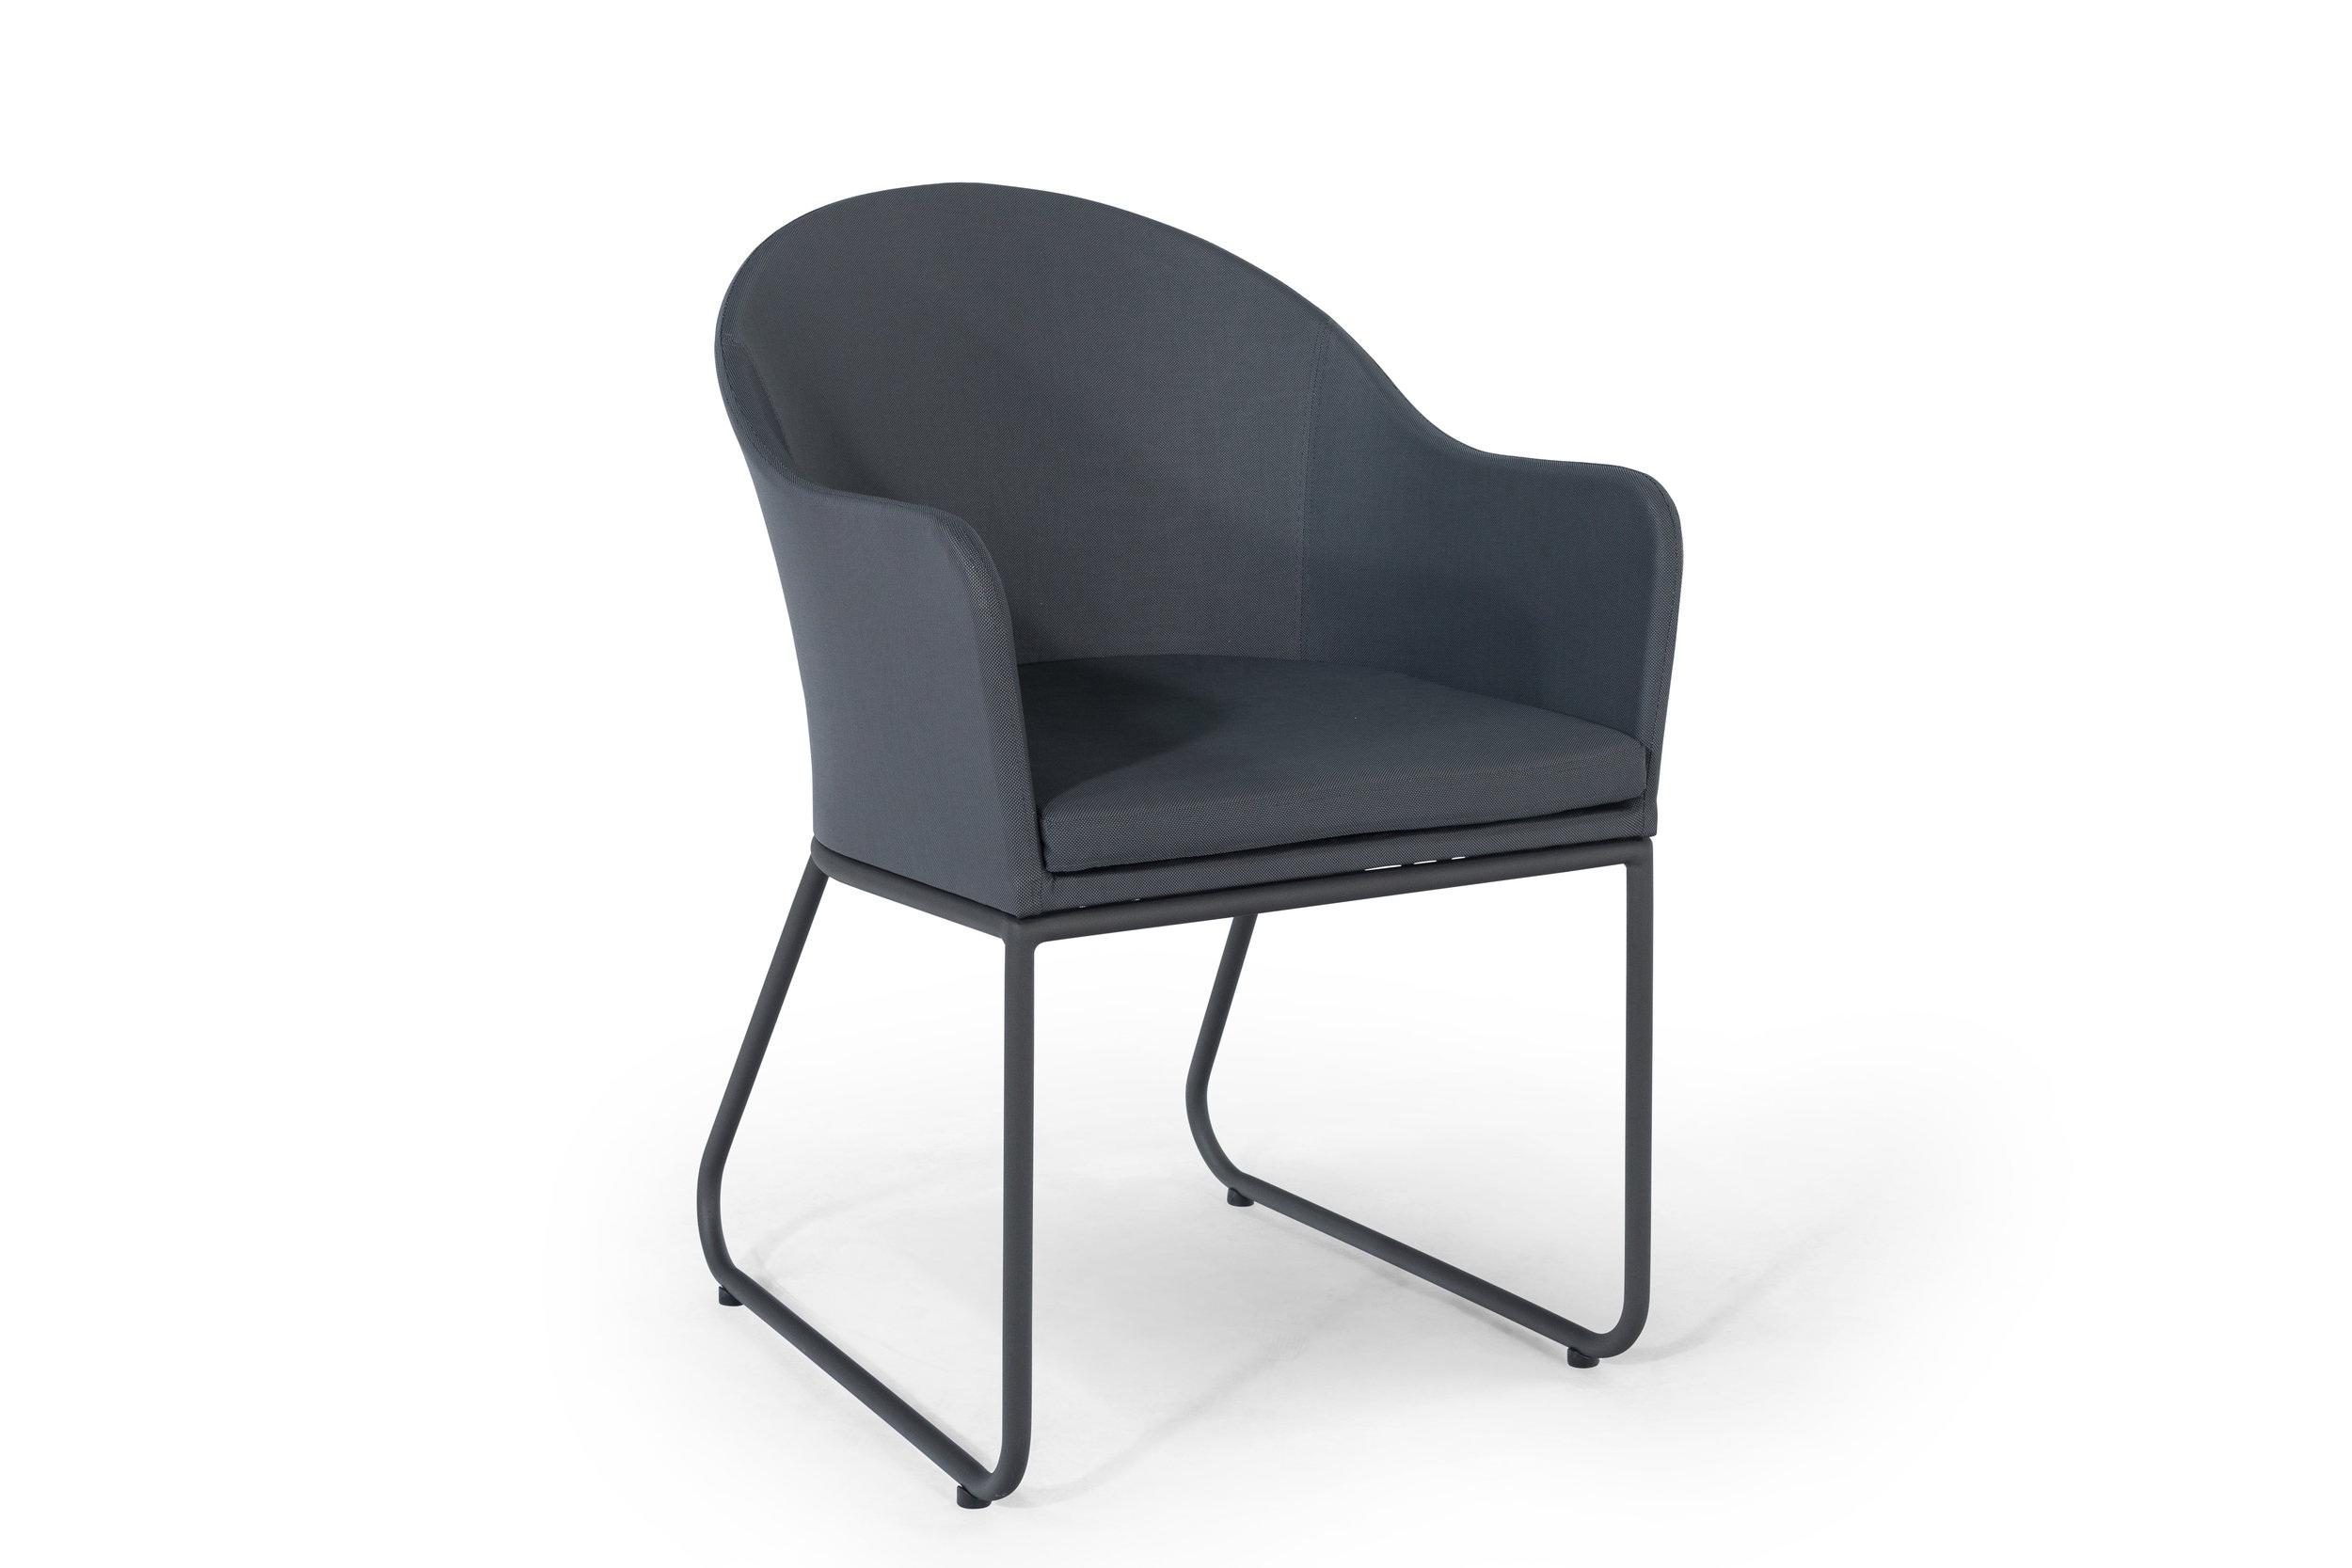 Helix Dining Chair